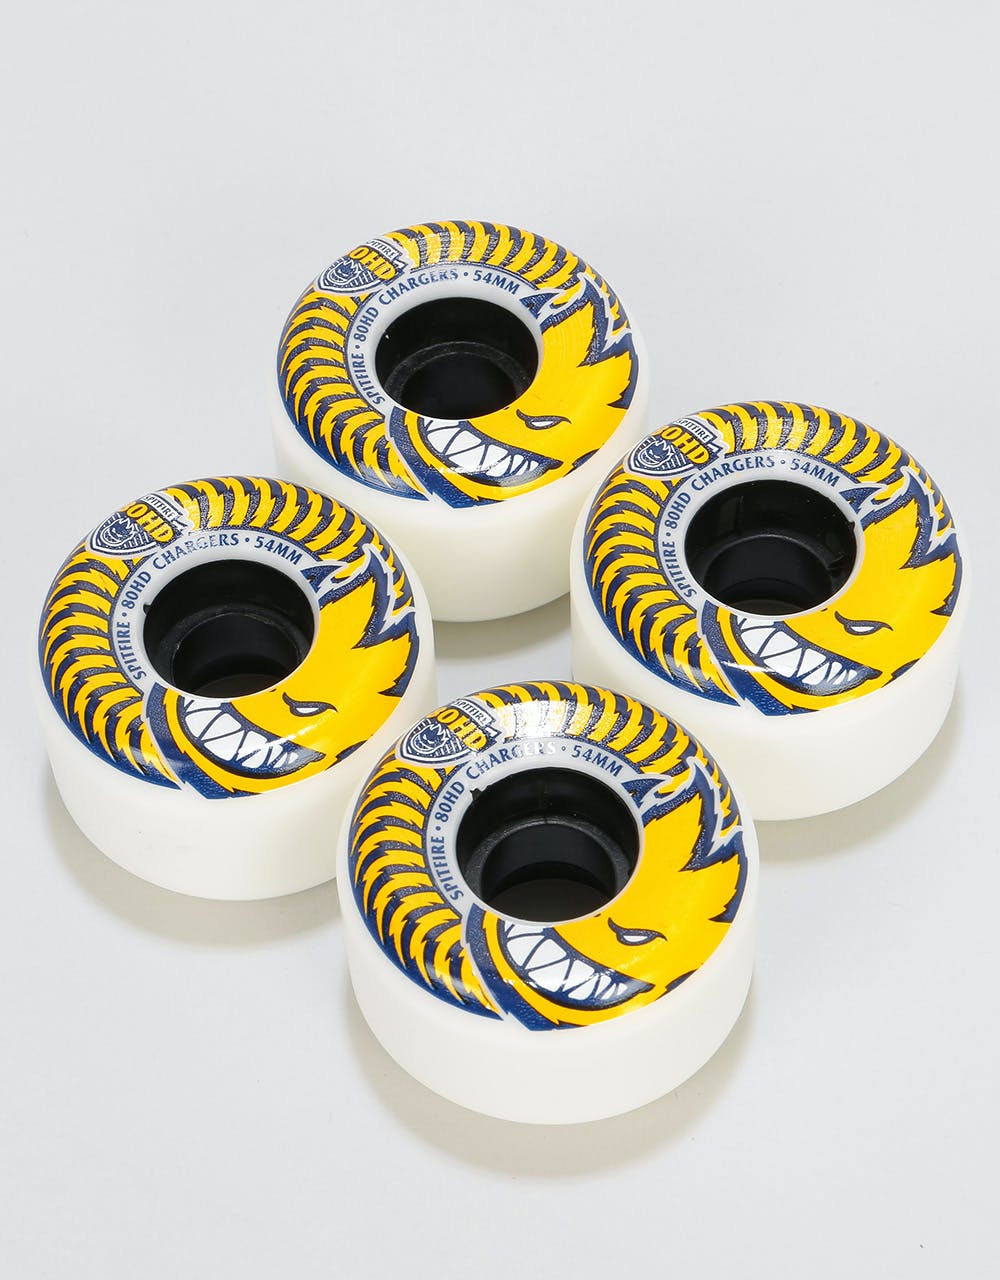 Spitfire Chargers Conical 80HD Skateboard Wheel - 54mm